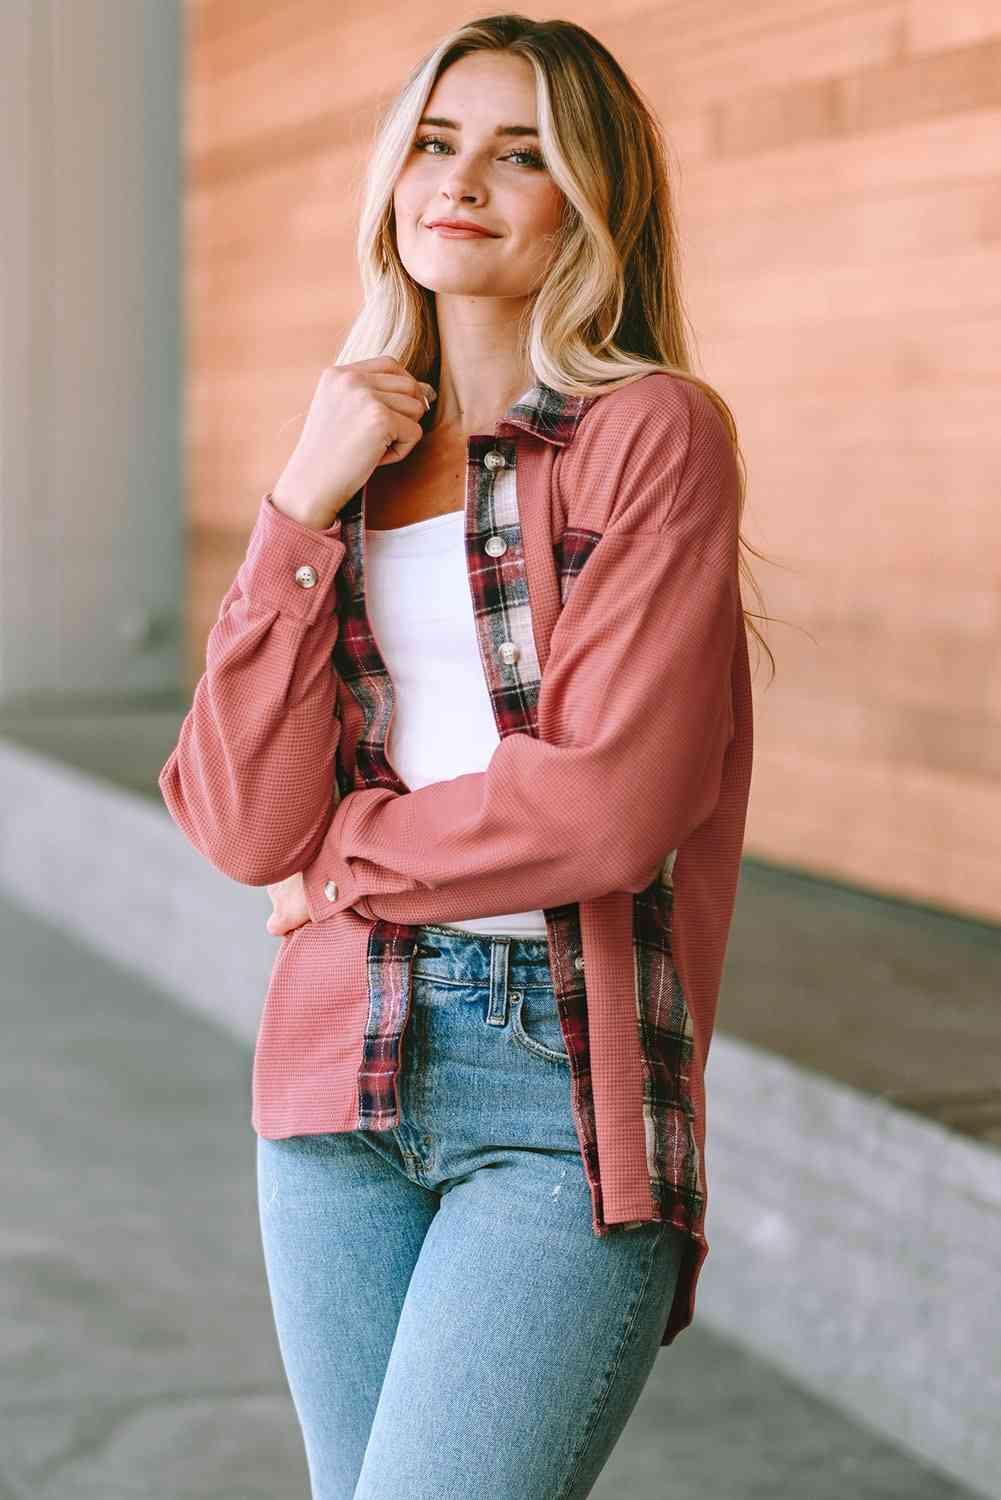 Simple Embrace Button Down Collared Plaid Shacket - MXSTUDIO.COM